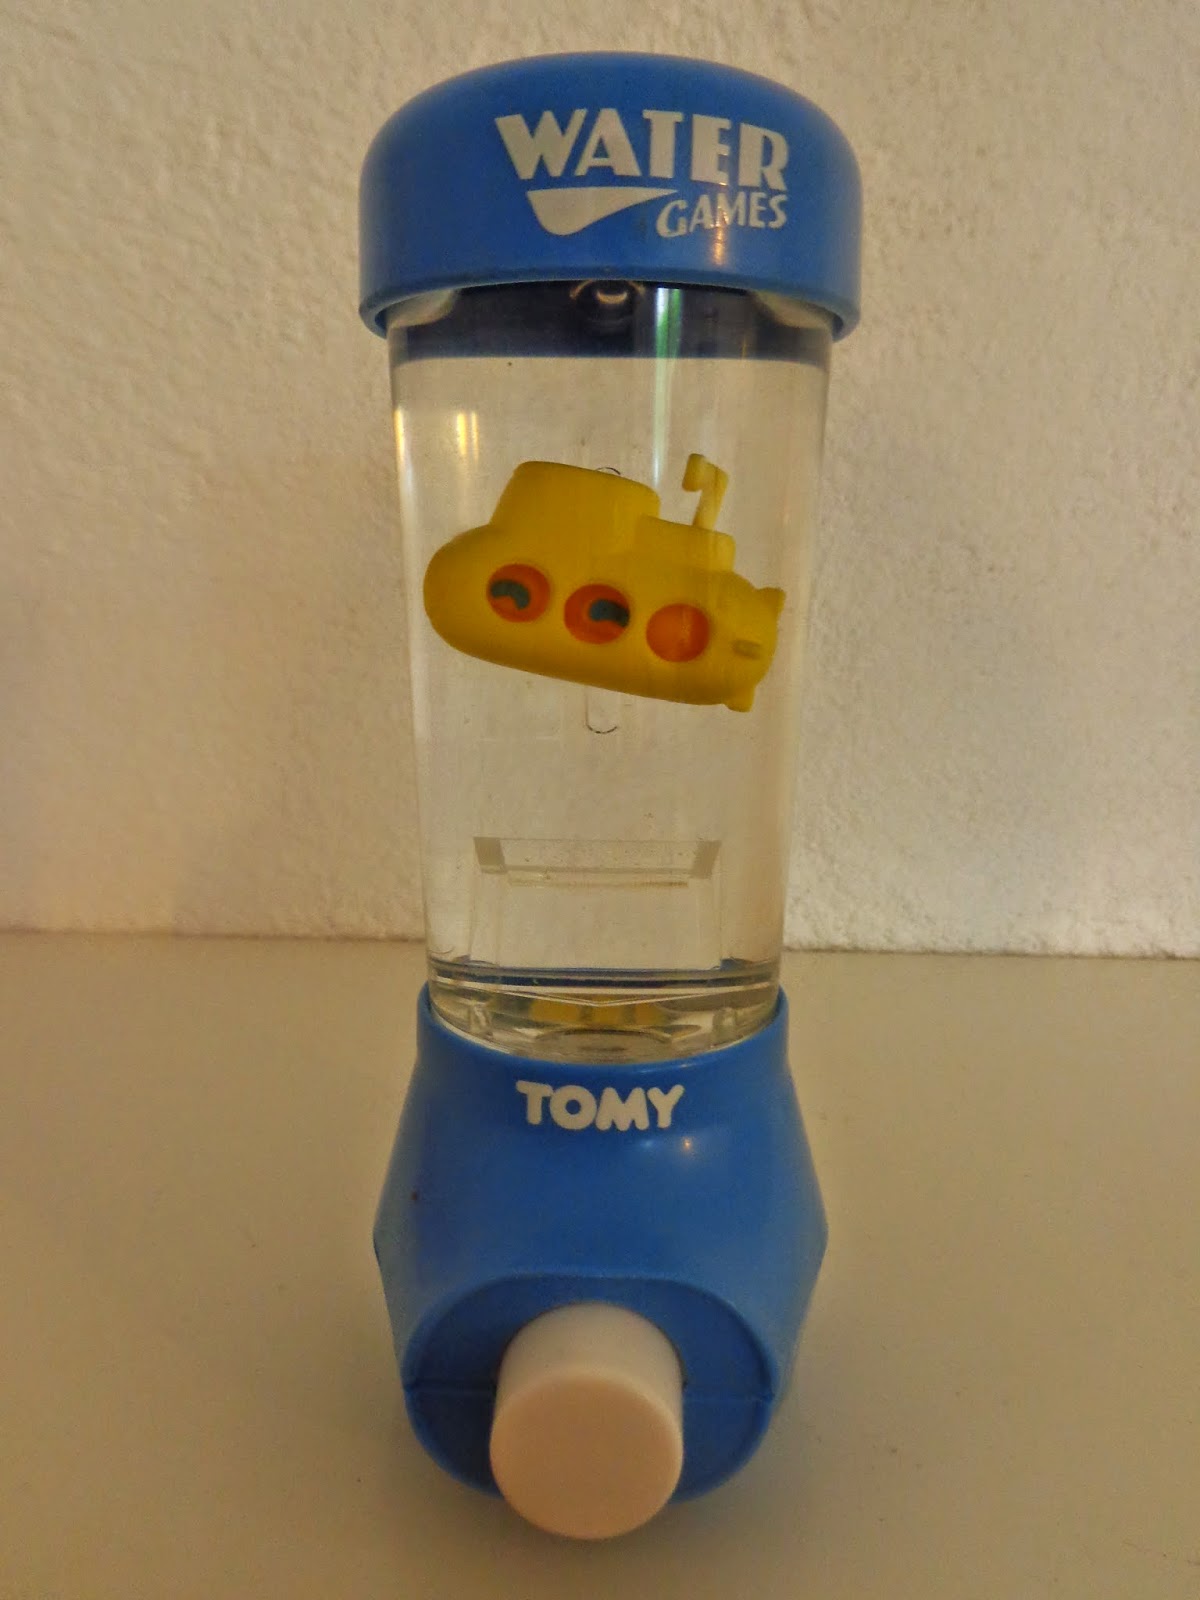 tomy water games